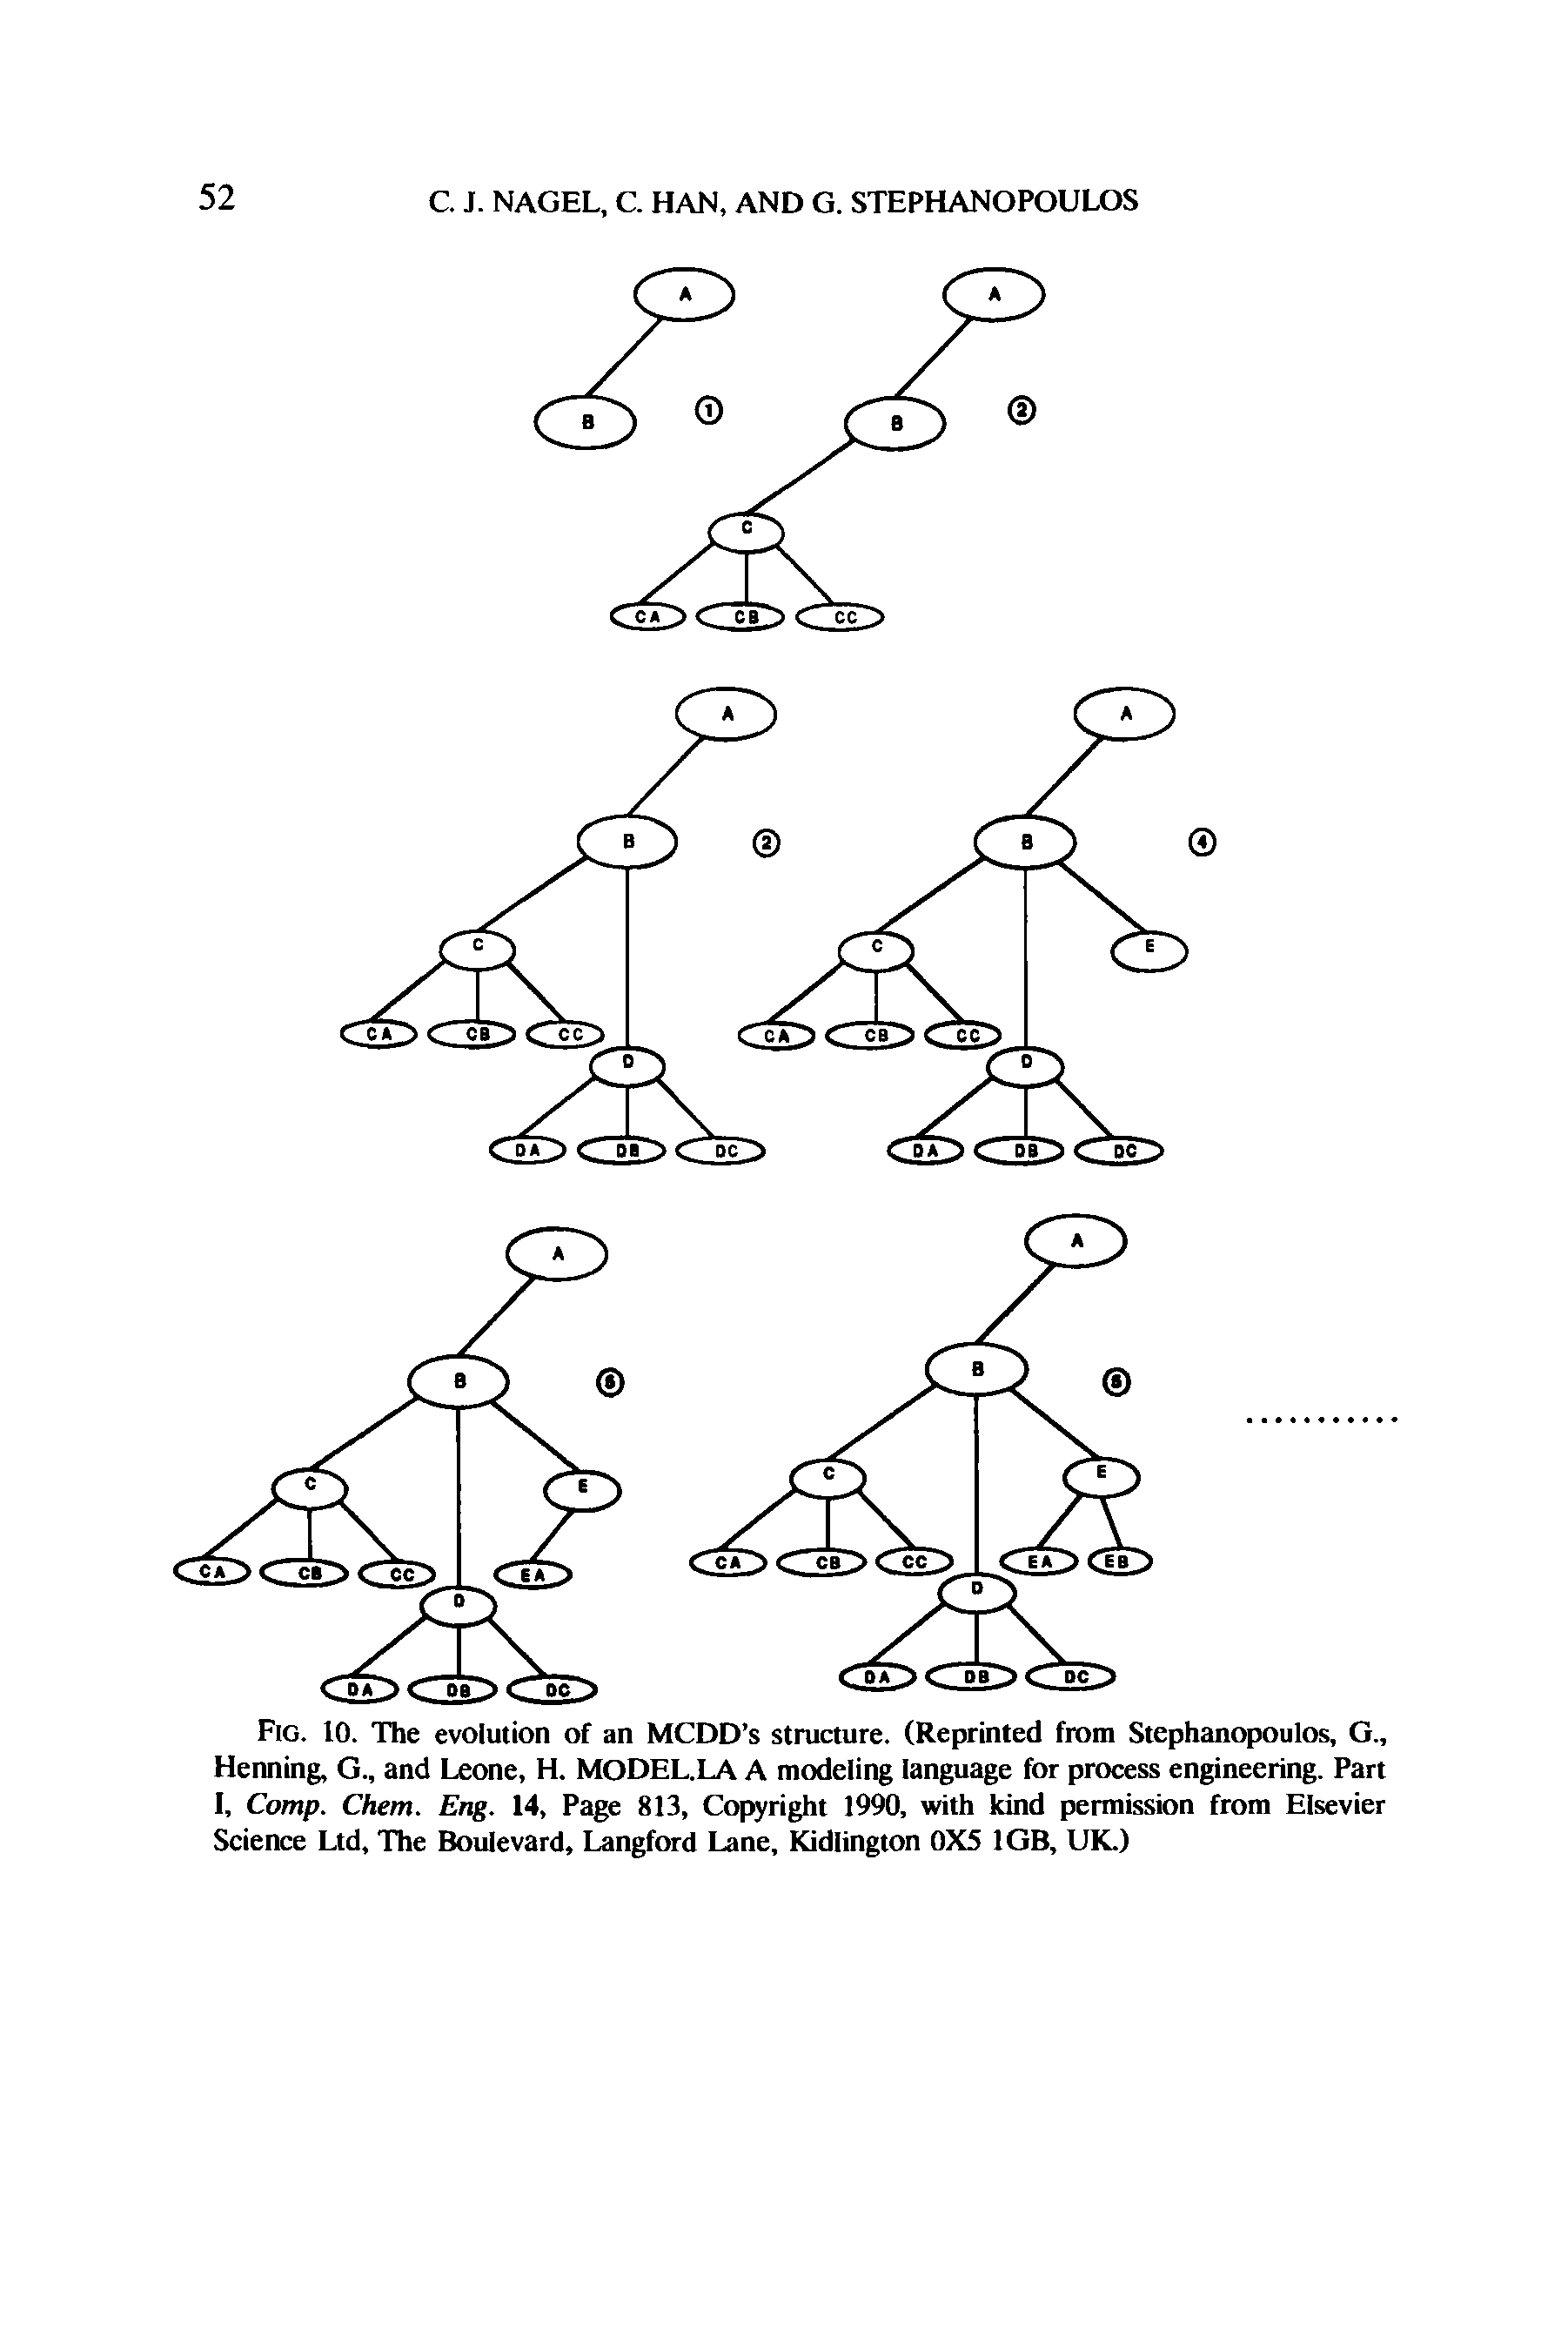 Fig. 10. The evolution of an MCDD s structure. (Reprinted from Stephanopoulos, G., Henning, G., and Leone, H. MODEL.LA A modeling language for process engineering. Part I, Comp. Chem. Eng. 14, Page 813, Copyright 1990, with kind permission from Elsevier Science Ltd, The Boulevard, Langford Lane, Kidlington 0X5 1GB, UK.)...